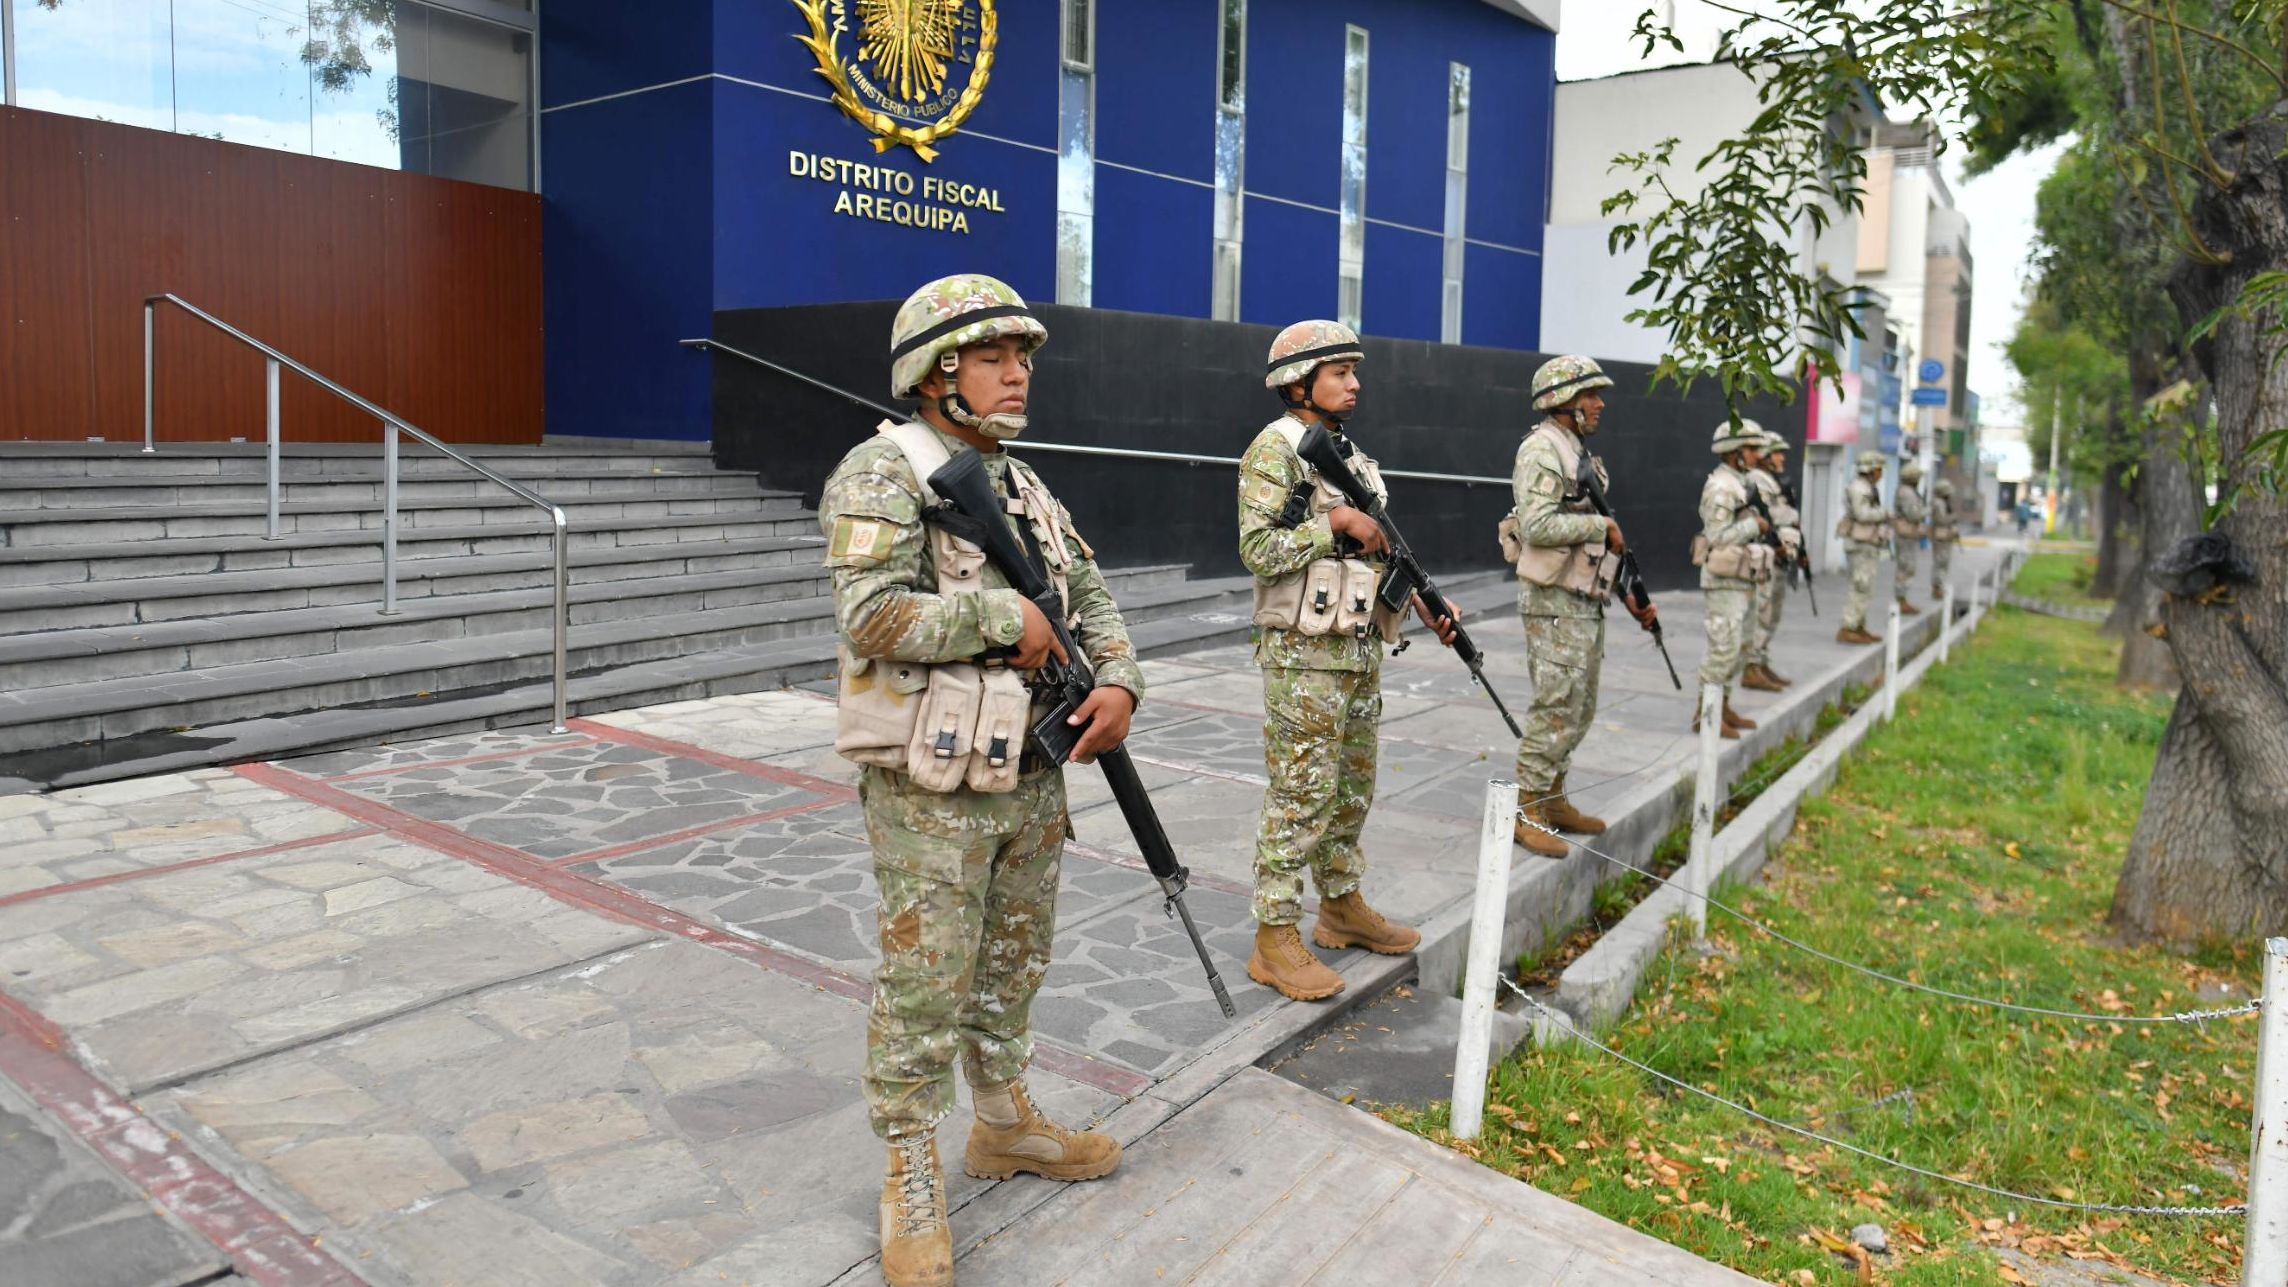 The military stand guard at an official building after demonstrations turned violent.